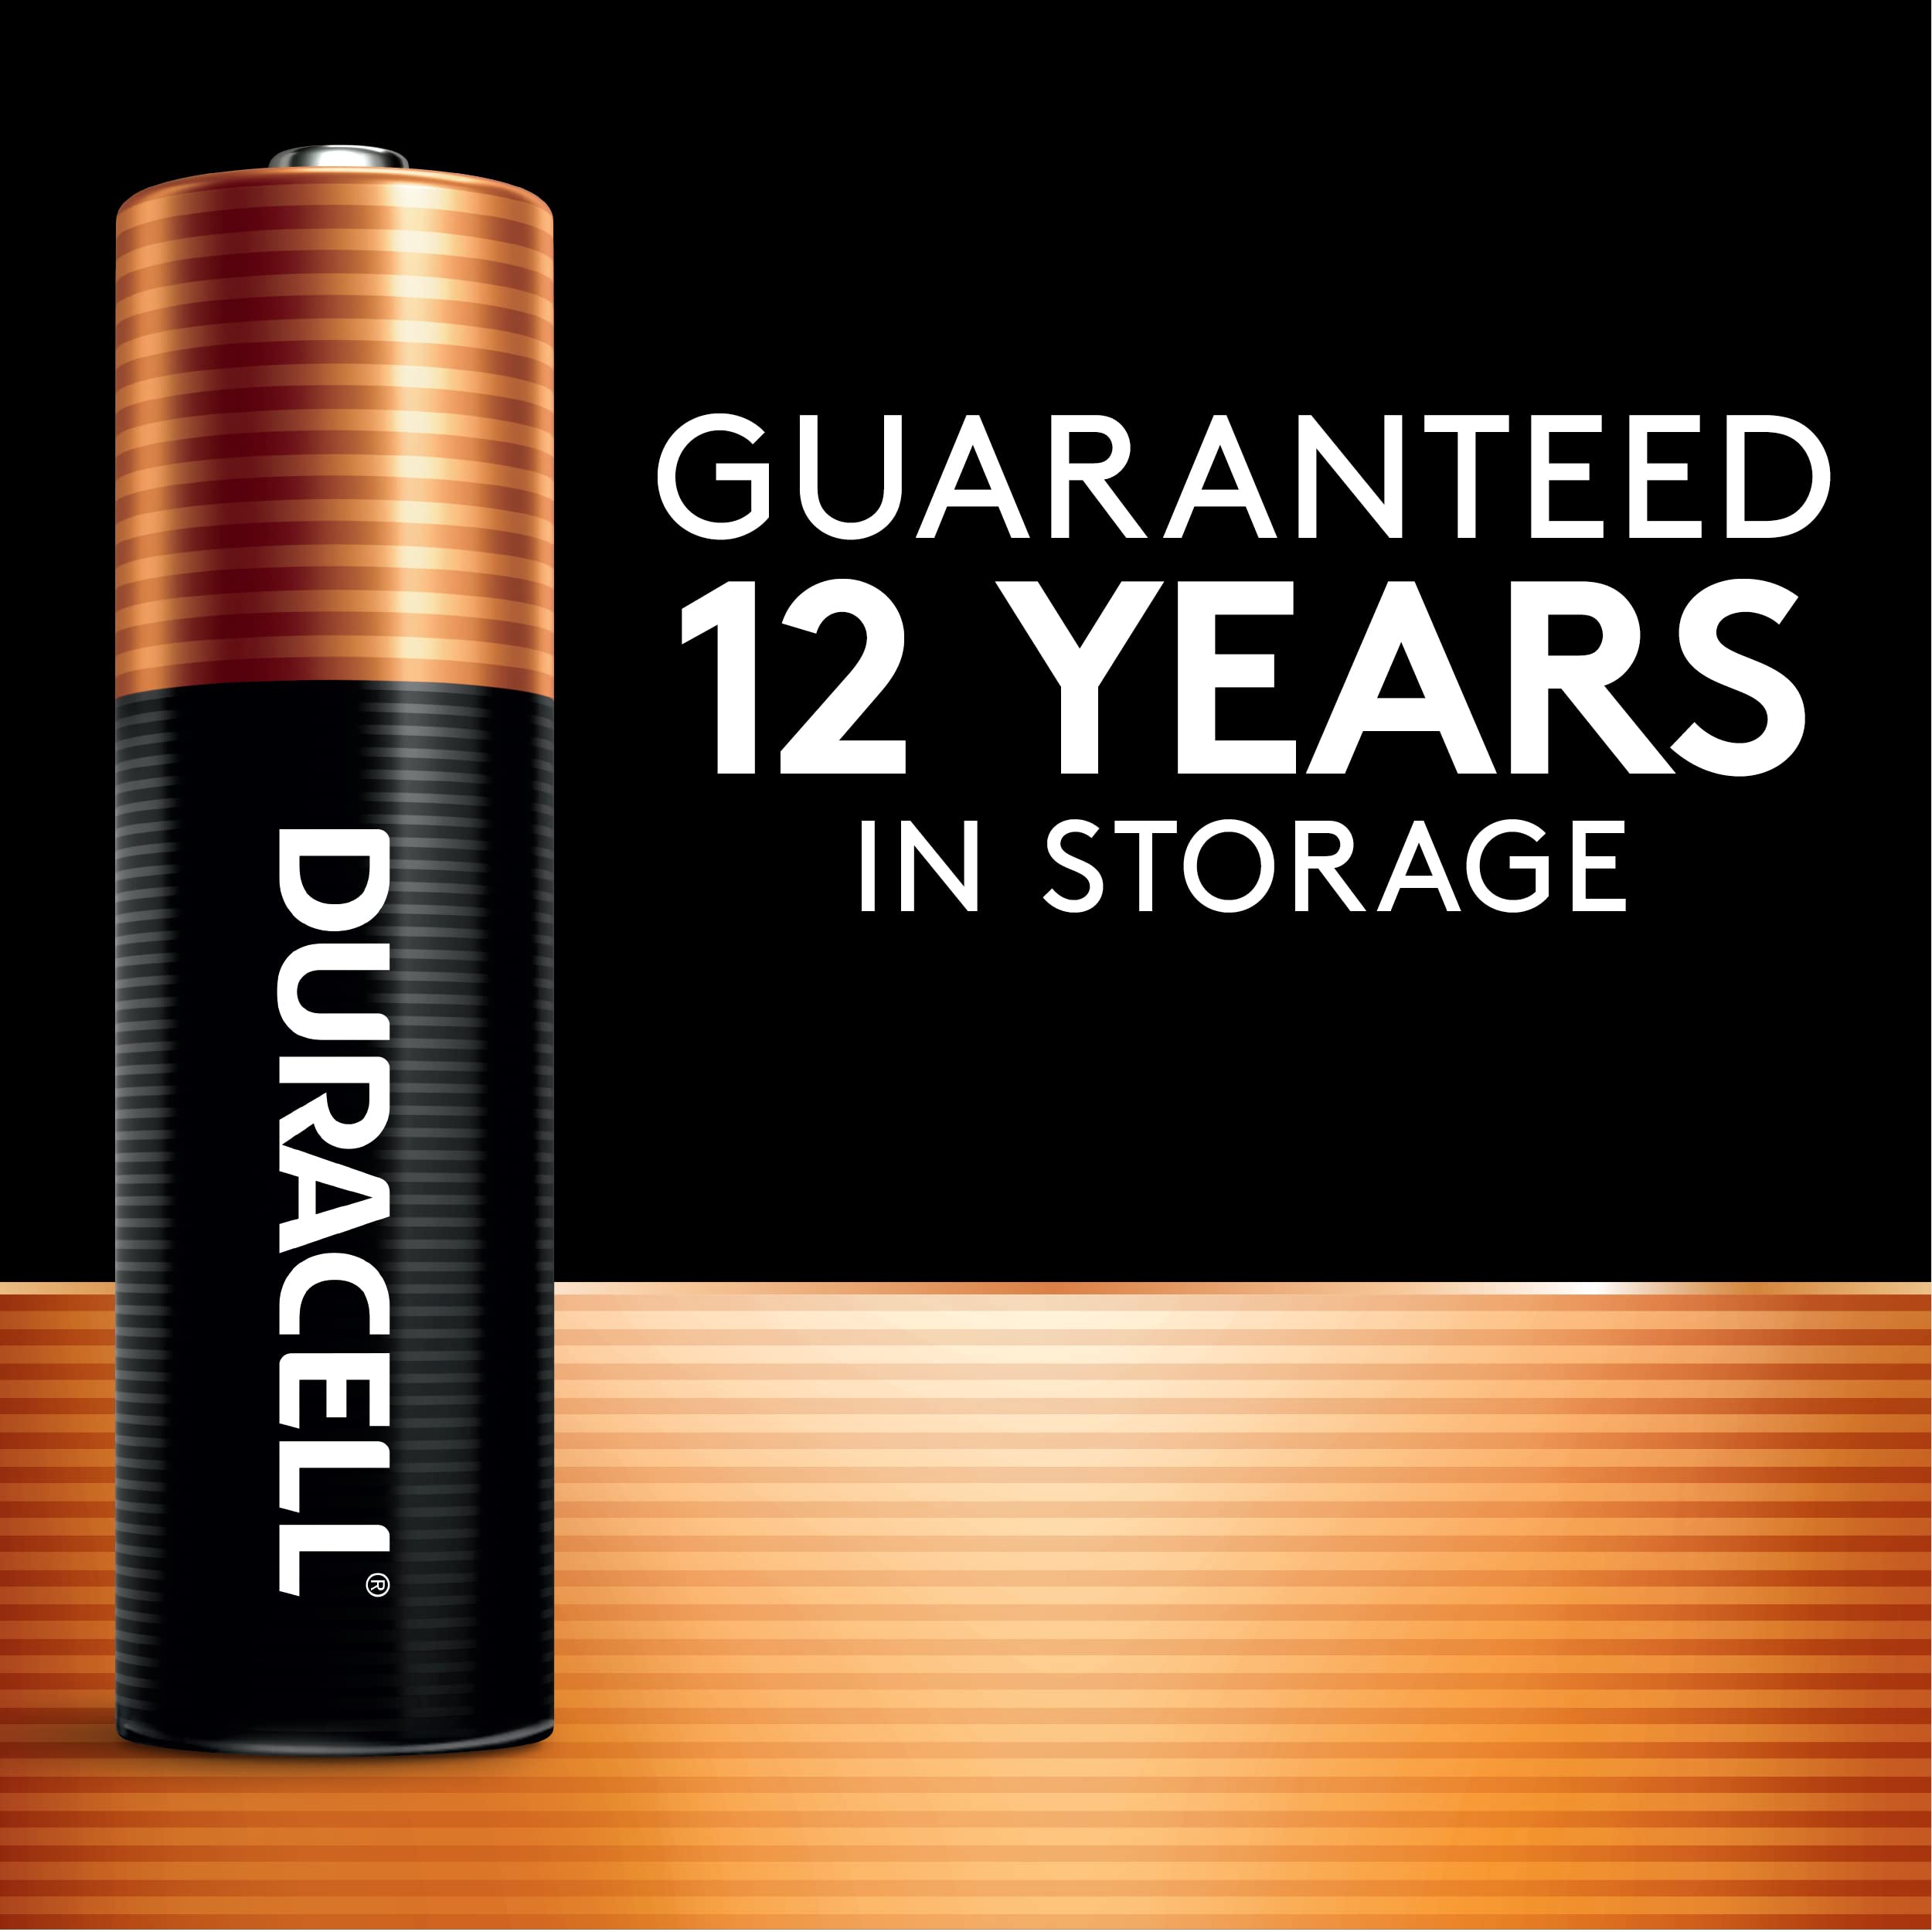 Duracell Coppertop AA Batteries 28 Count Pack Double A Battery with Power Boost Ingredients, Long-lasting Power Alkaline AA Battery for Household Devices (Ecommerce Packaging)